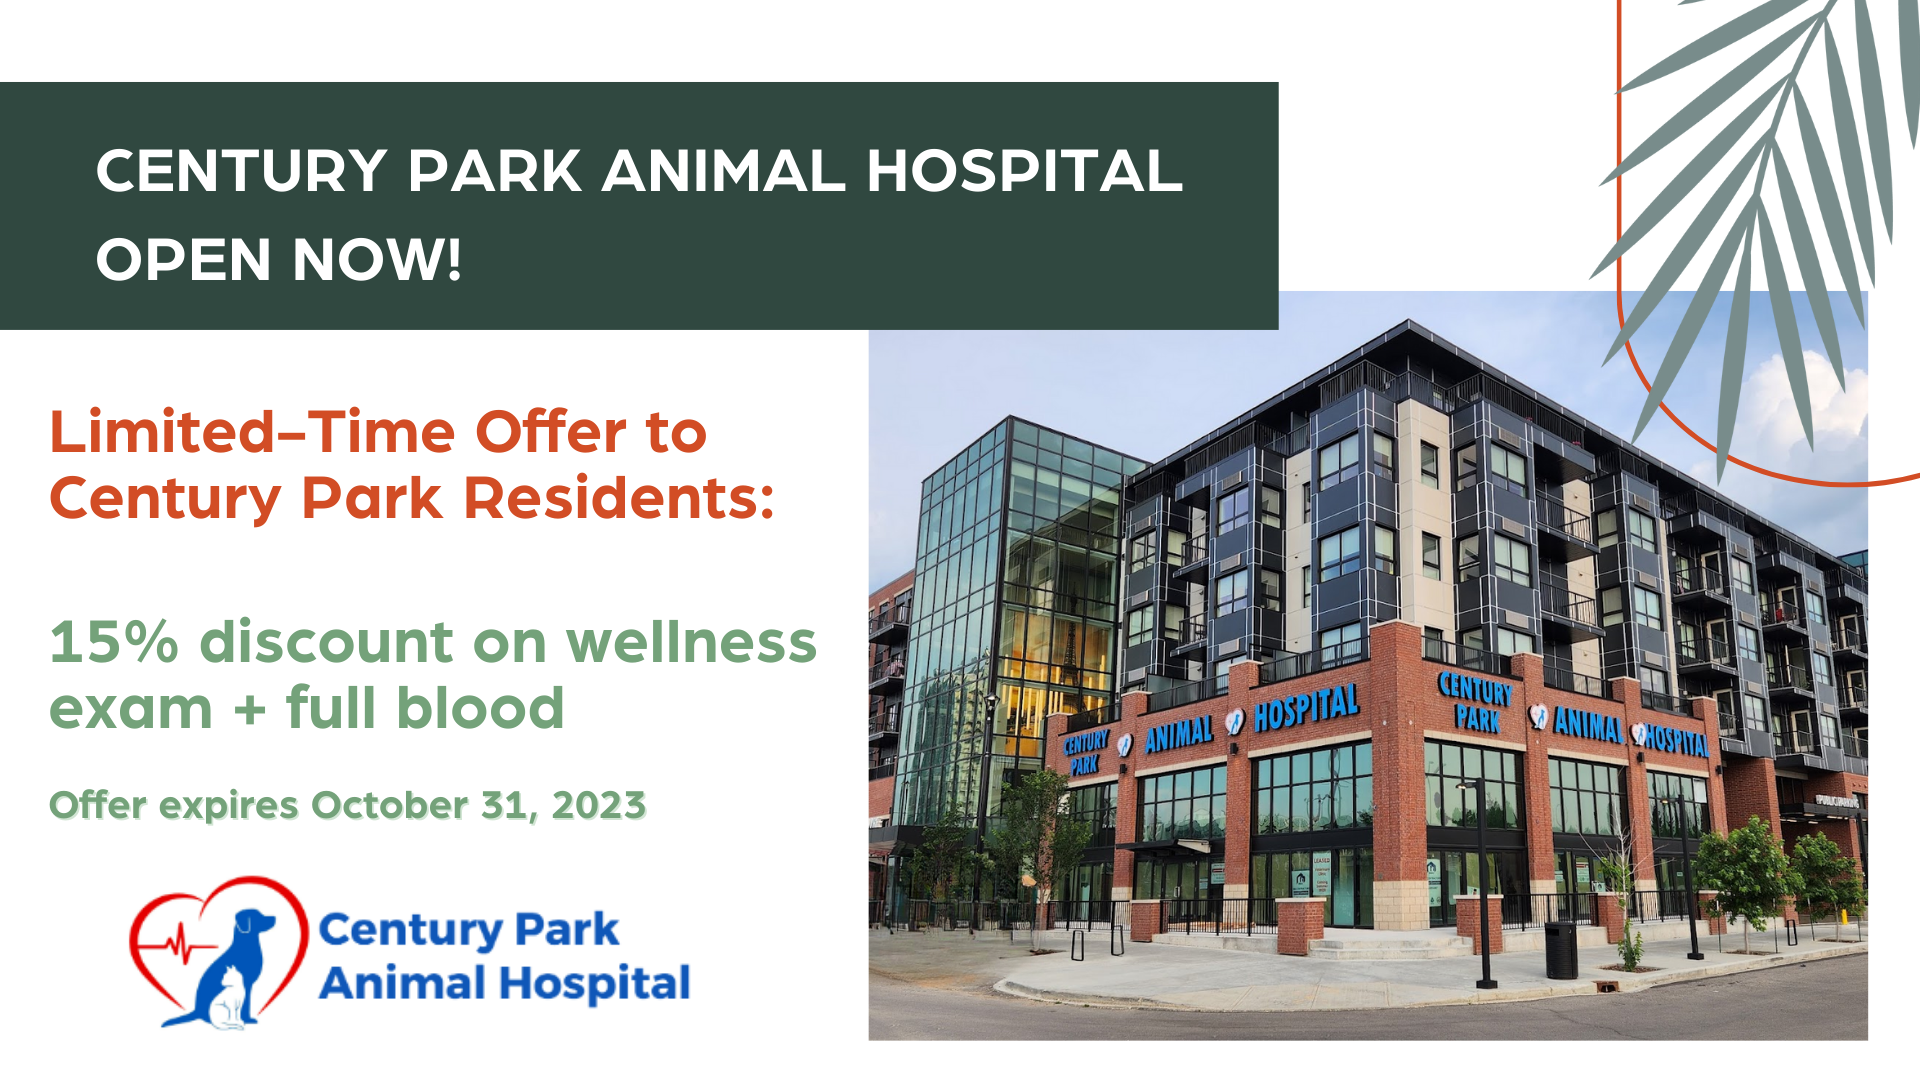 Century Park Animal Hospital Open Now - Limited Time Offer to Century Park Residents